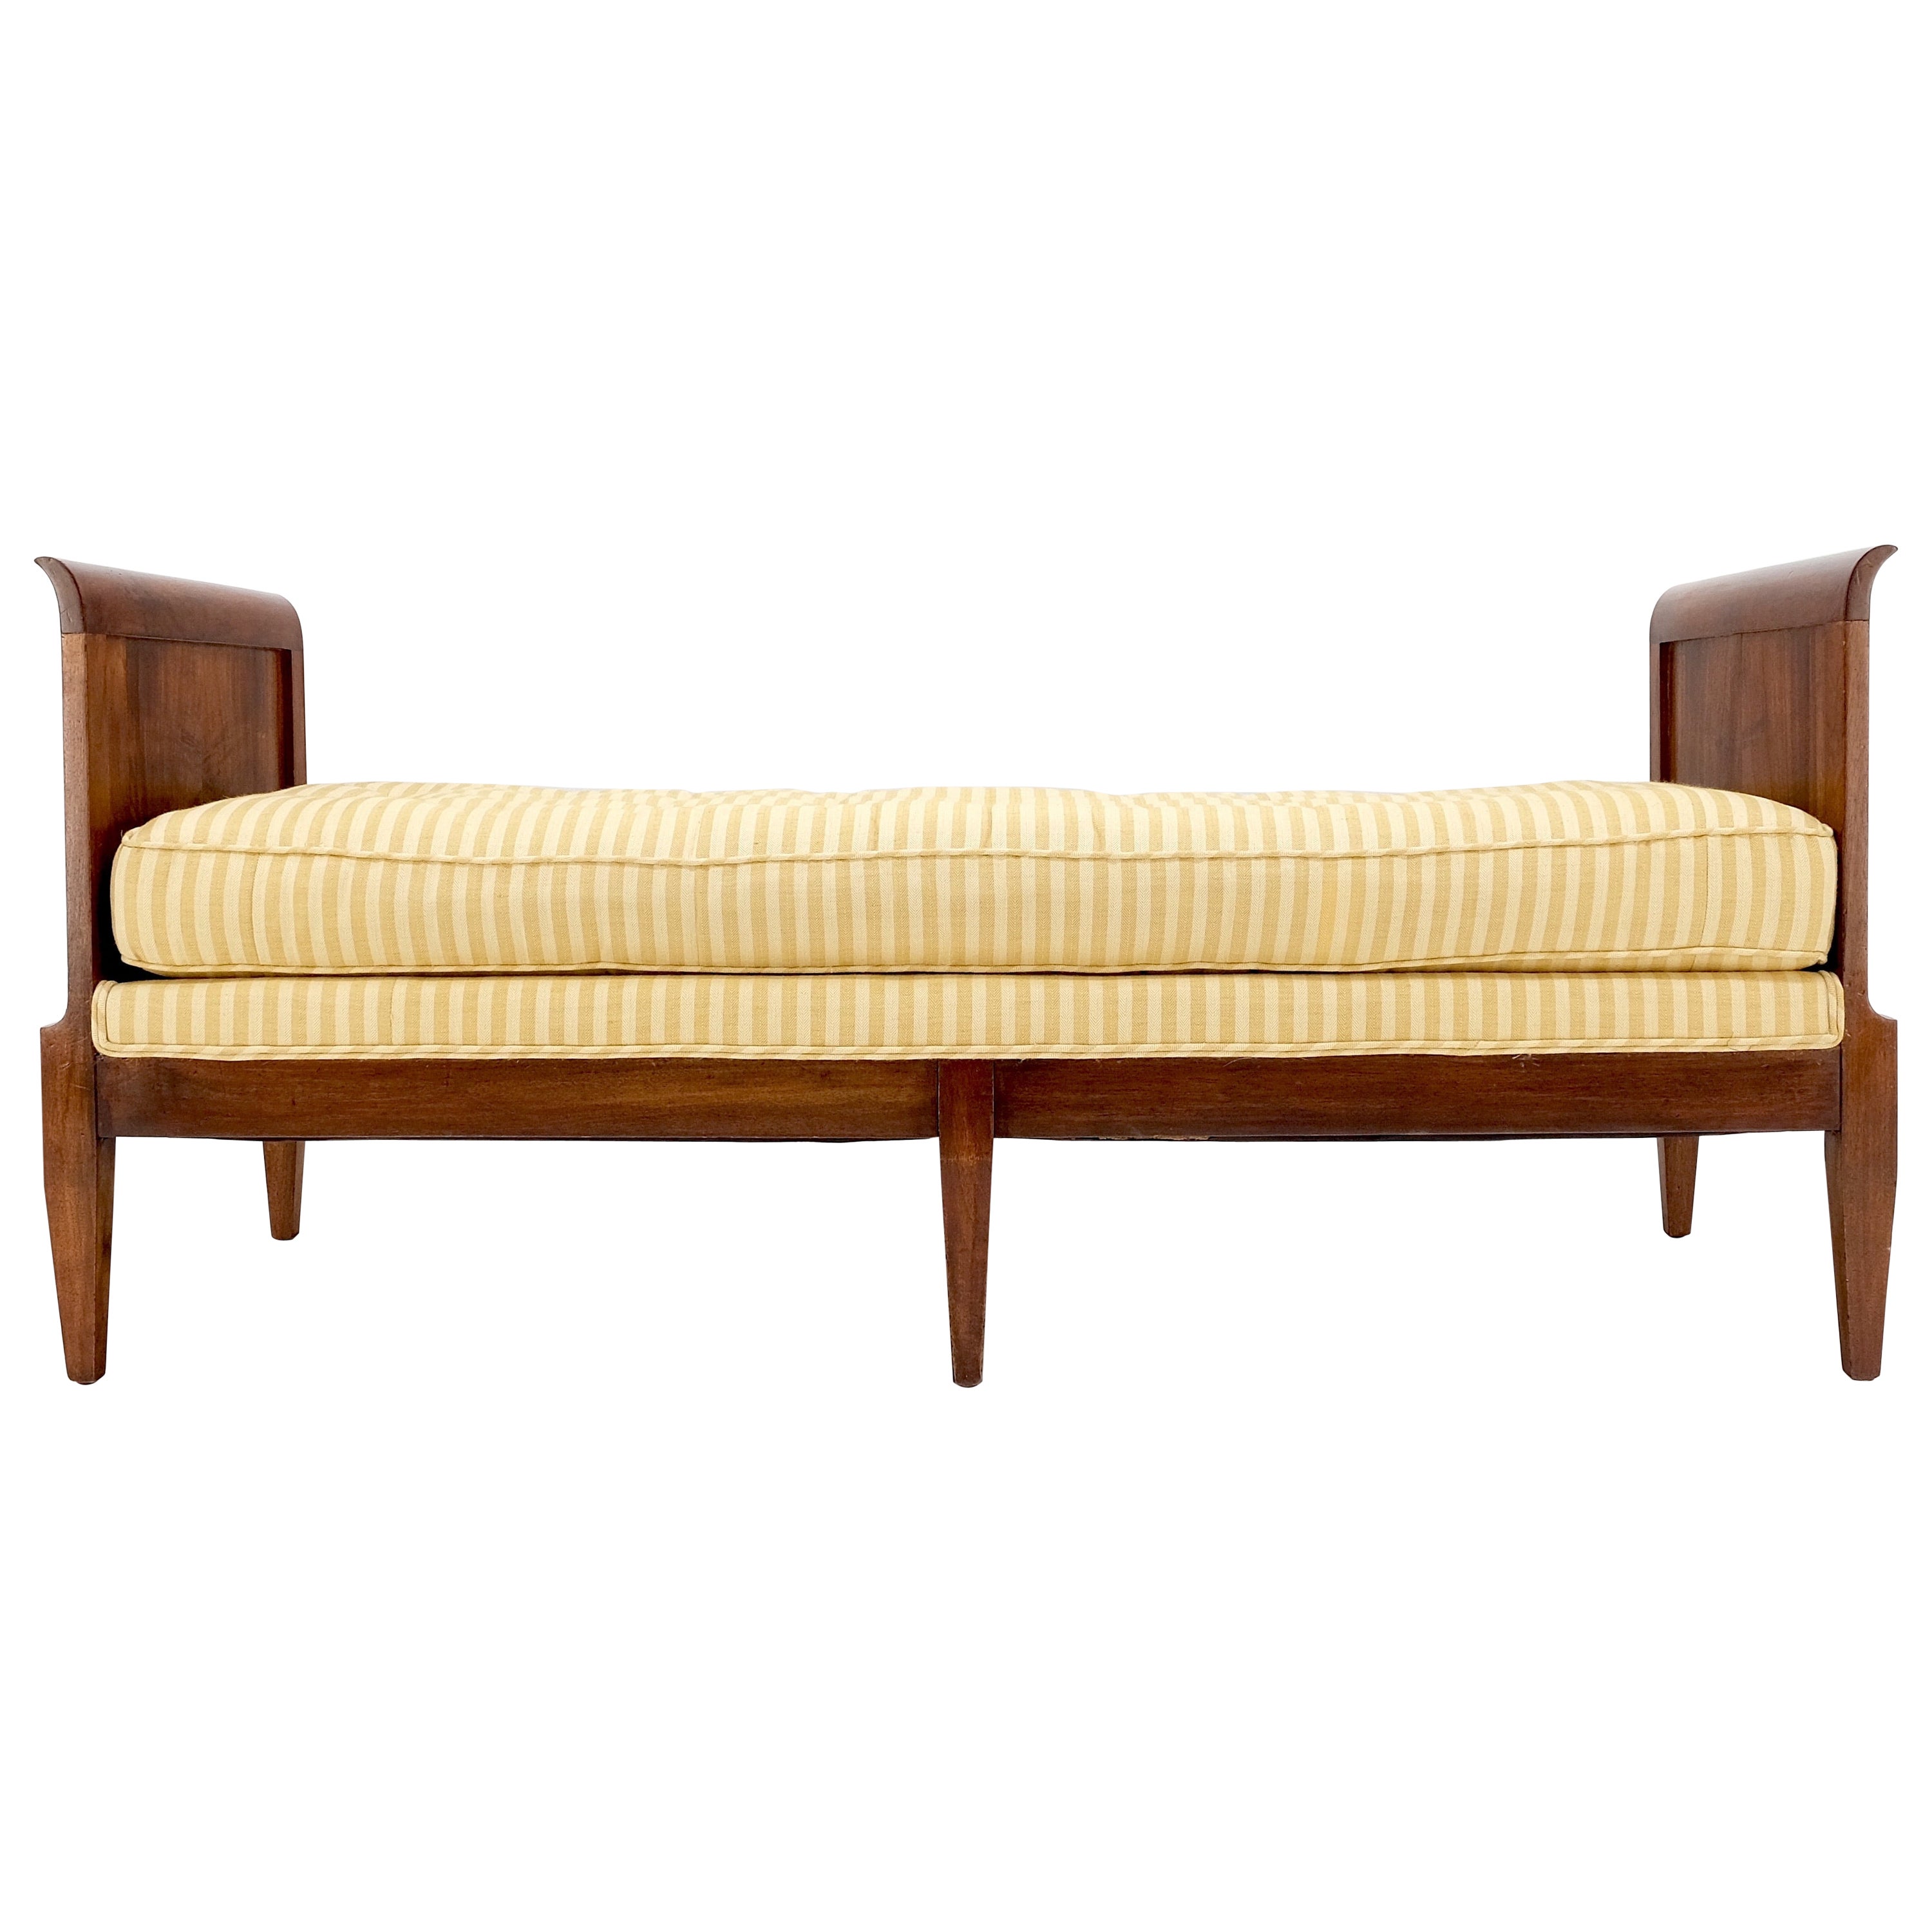 Mahogany Slight Panels Arms Compact Daybed Style Gold Stripe Window Bench MINT!